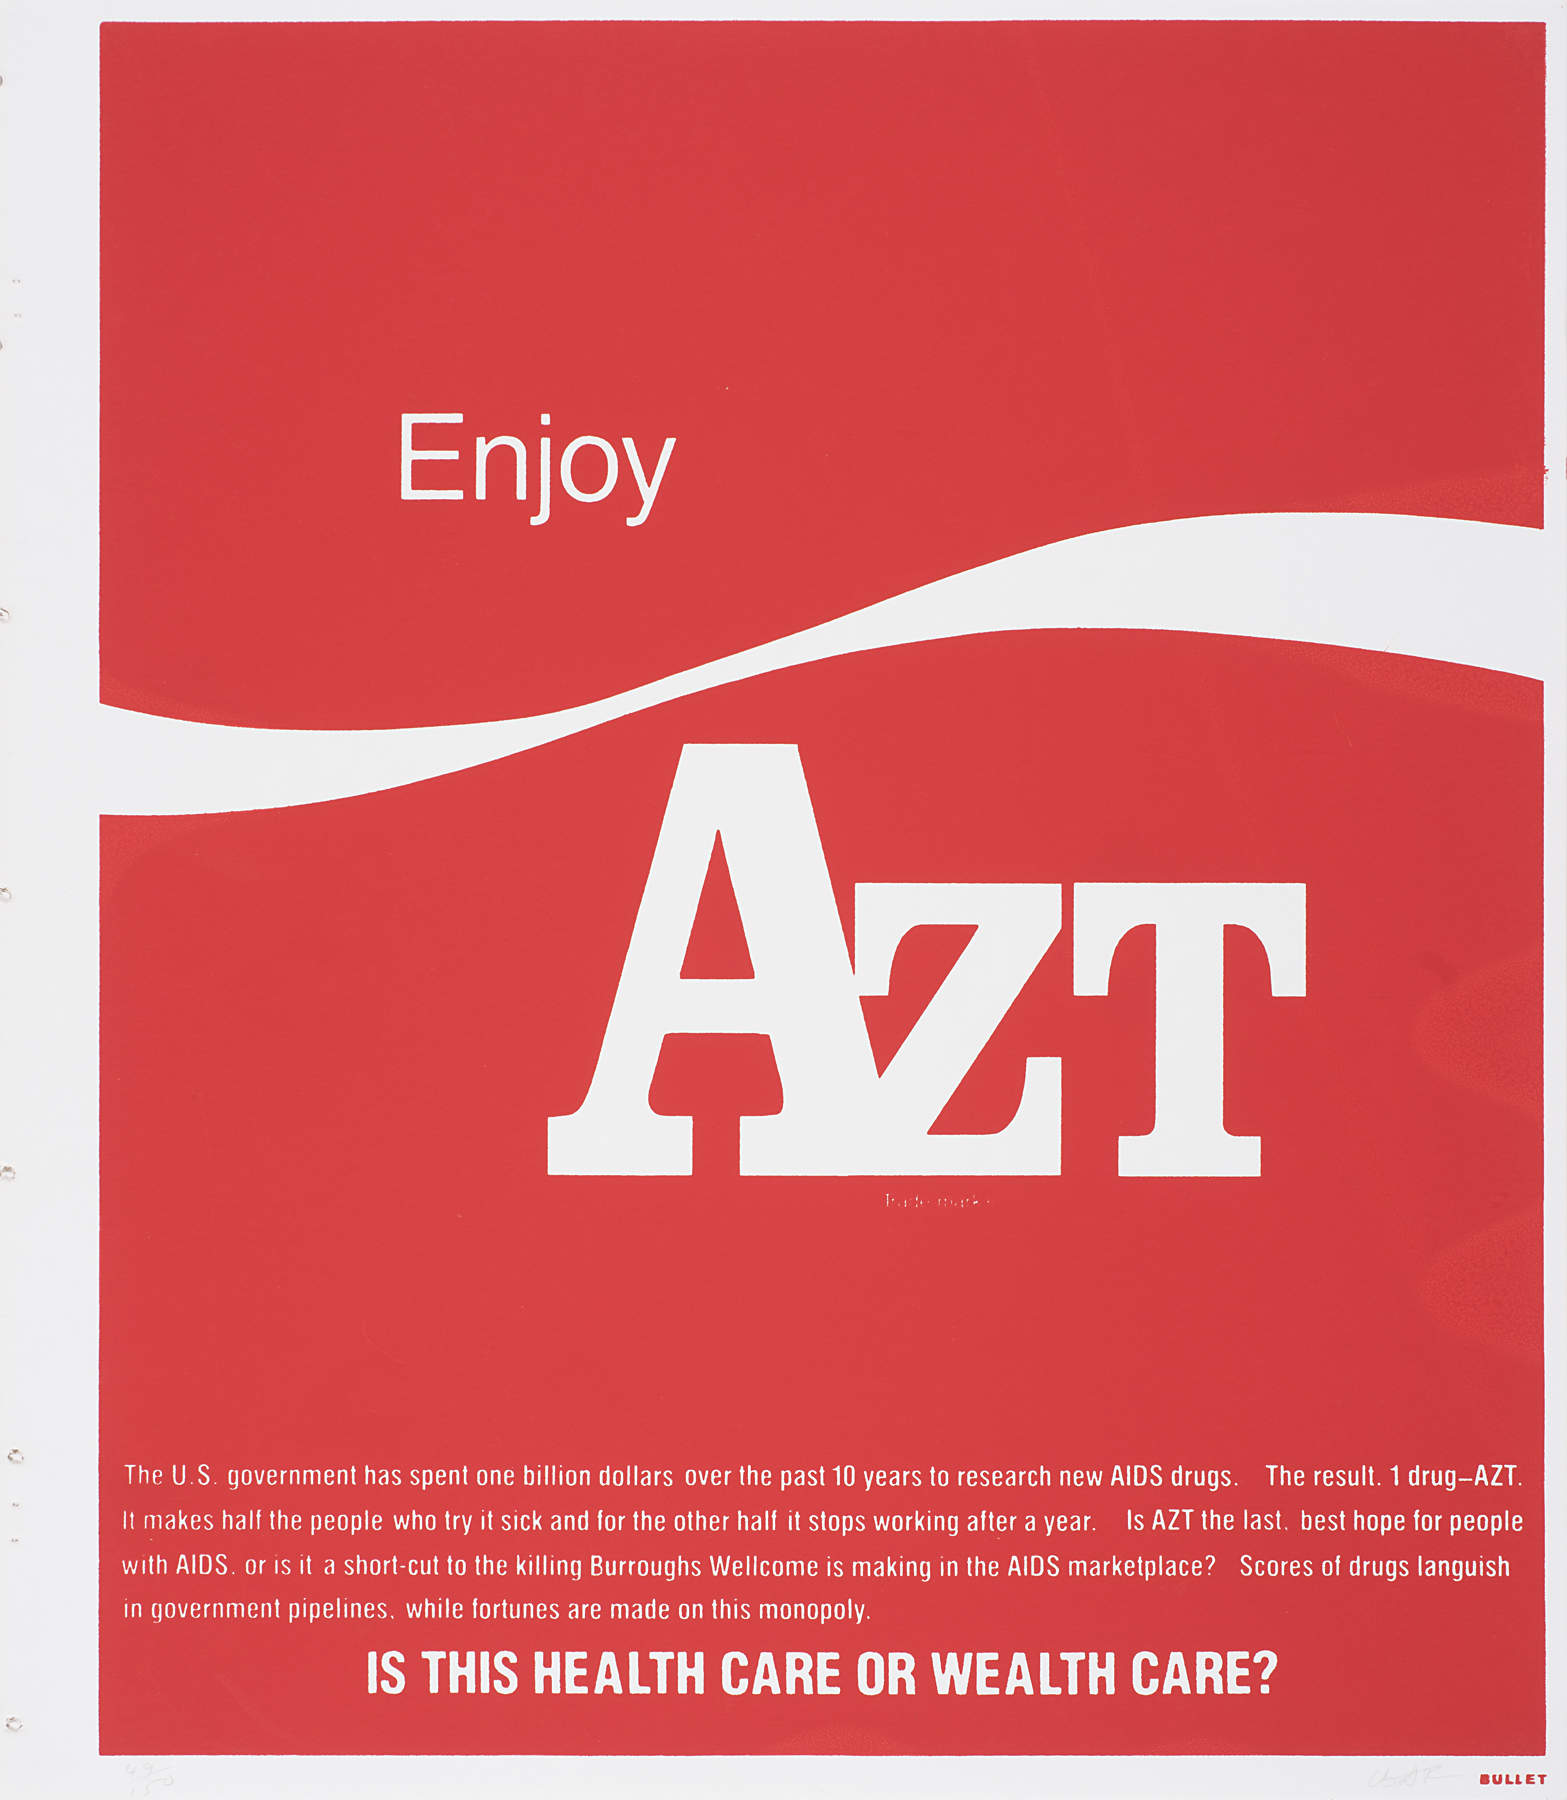 Mimicking the Coca-Cola logo, the red background of this print is punctuated with white text. The top reads “Enjoy AZT” with the Coca-Cola white ribbon between the words. The bottom of the print features a paragraph of white text explaining the frustrations people who use AZT felt. Criticizing the company making a massive profit off AZT and people with AIDS, Burroughs Wellcome, the last line reads in bold letters “IS THIS HEALTH CARE OR WEALTH CARE?”